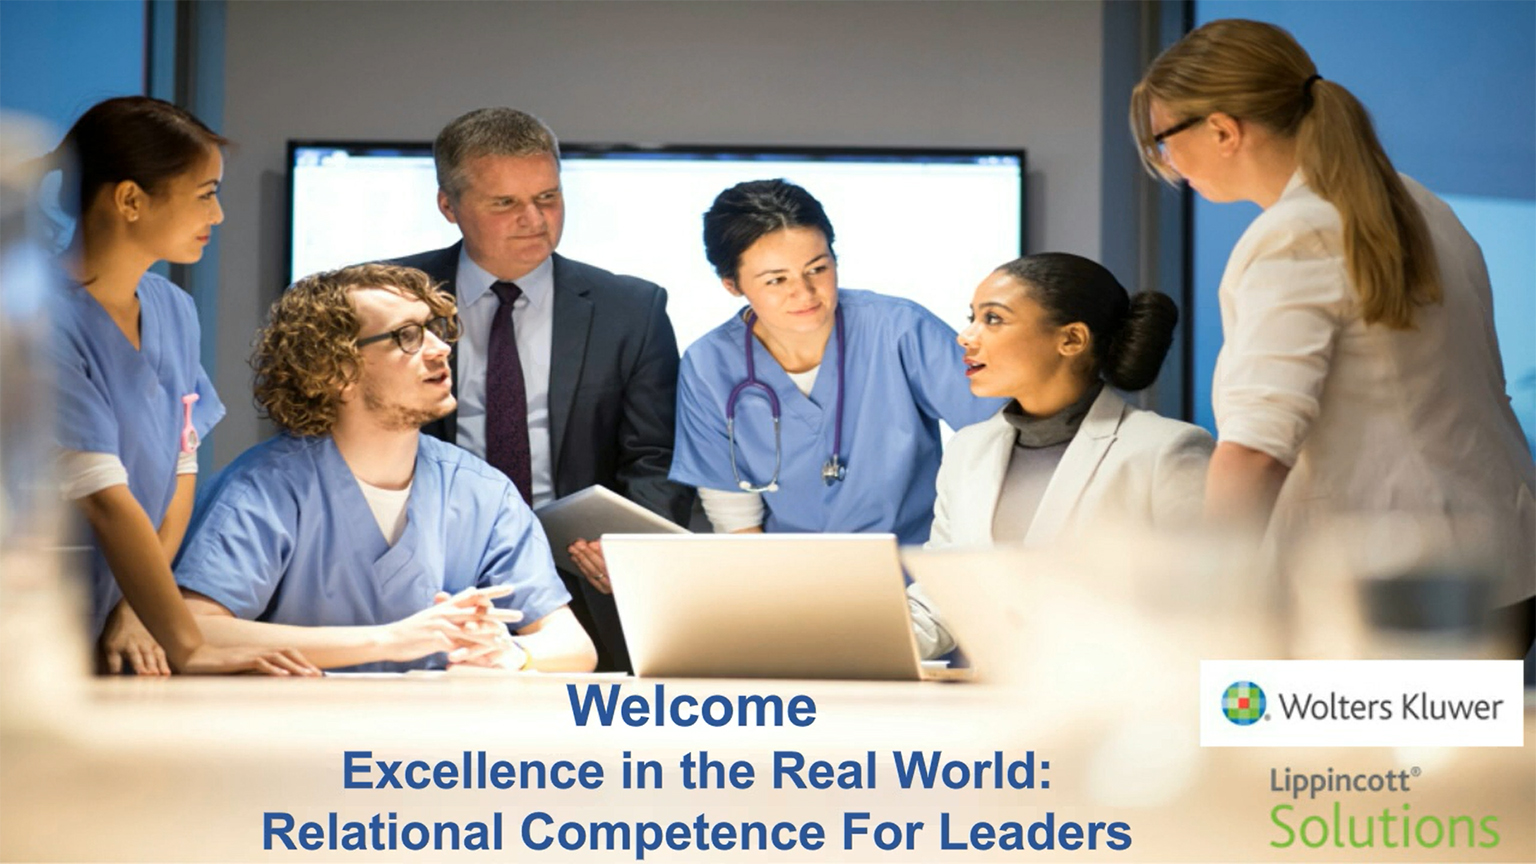 Screenshot of Excellence in the Real World: Relational Competence for Leaders video